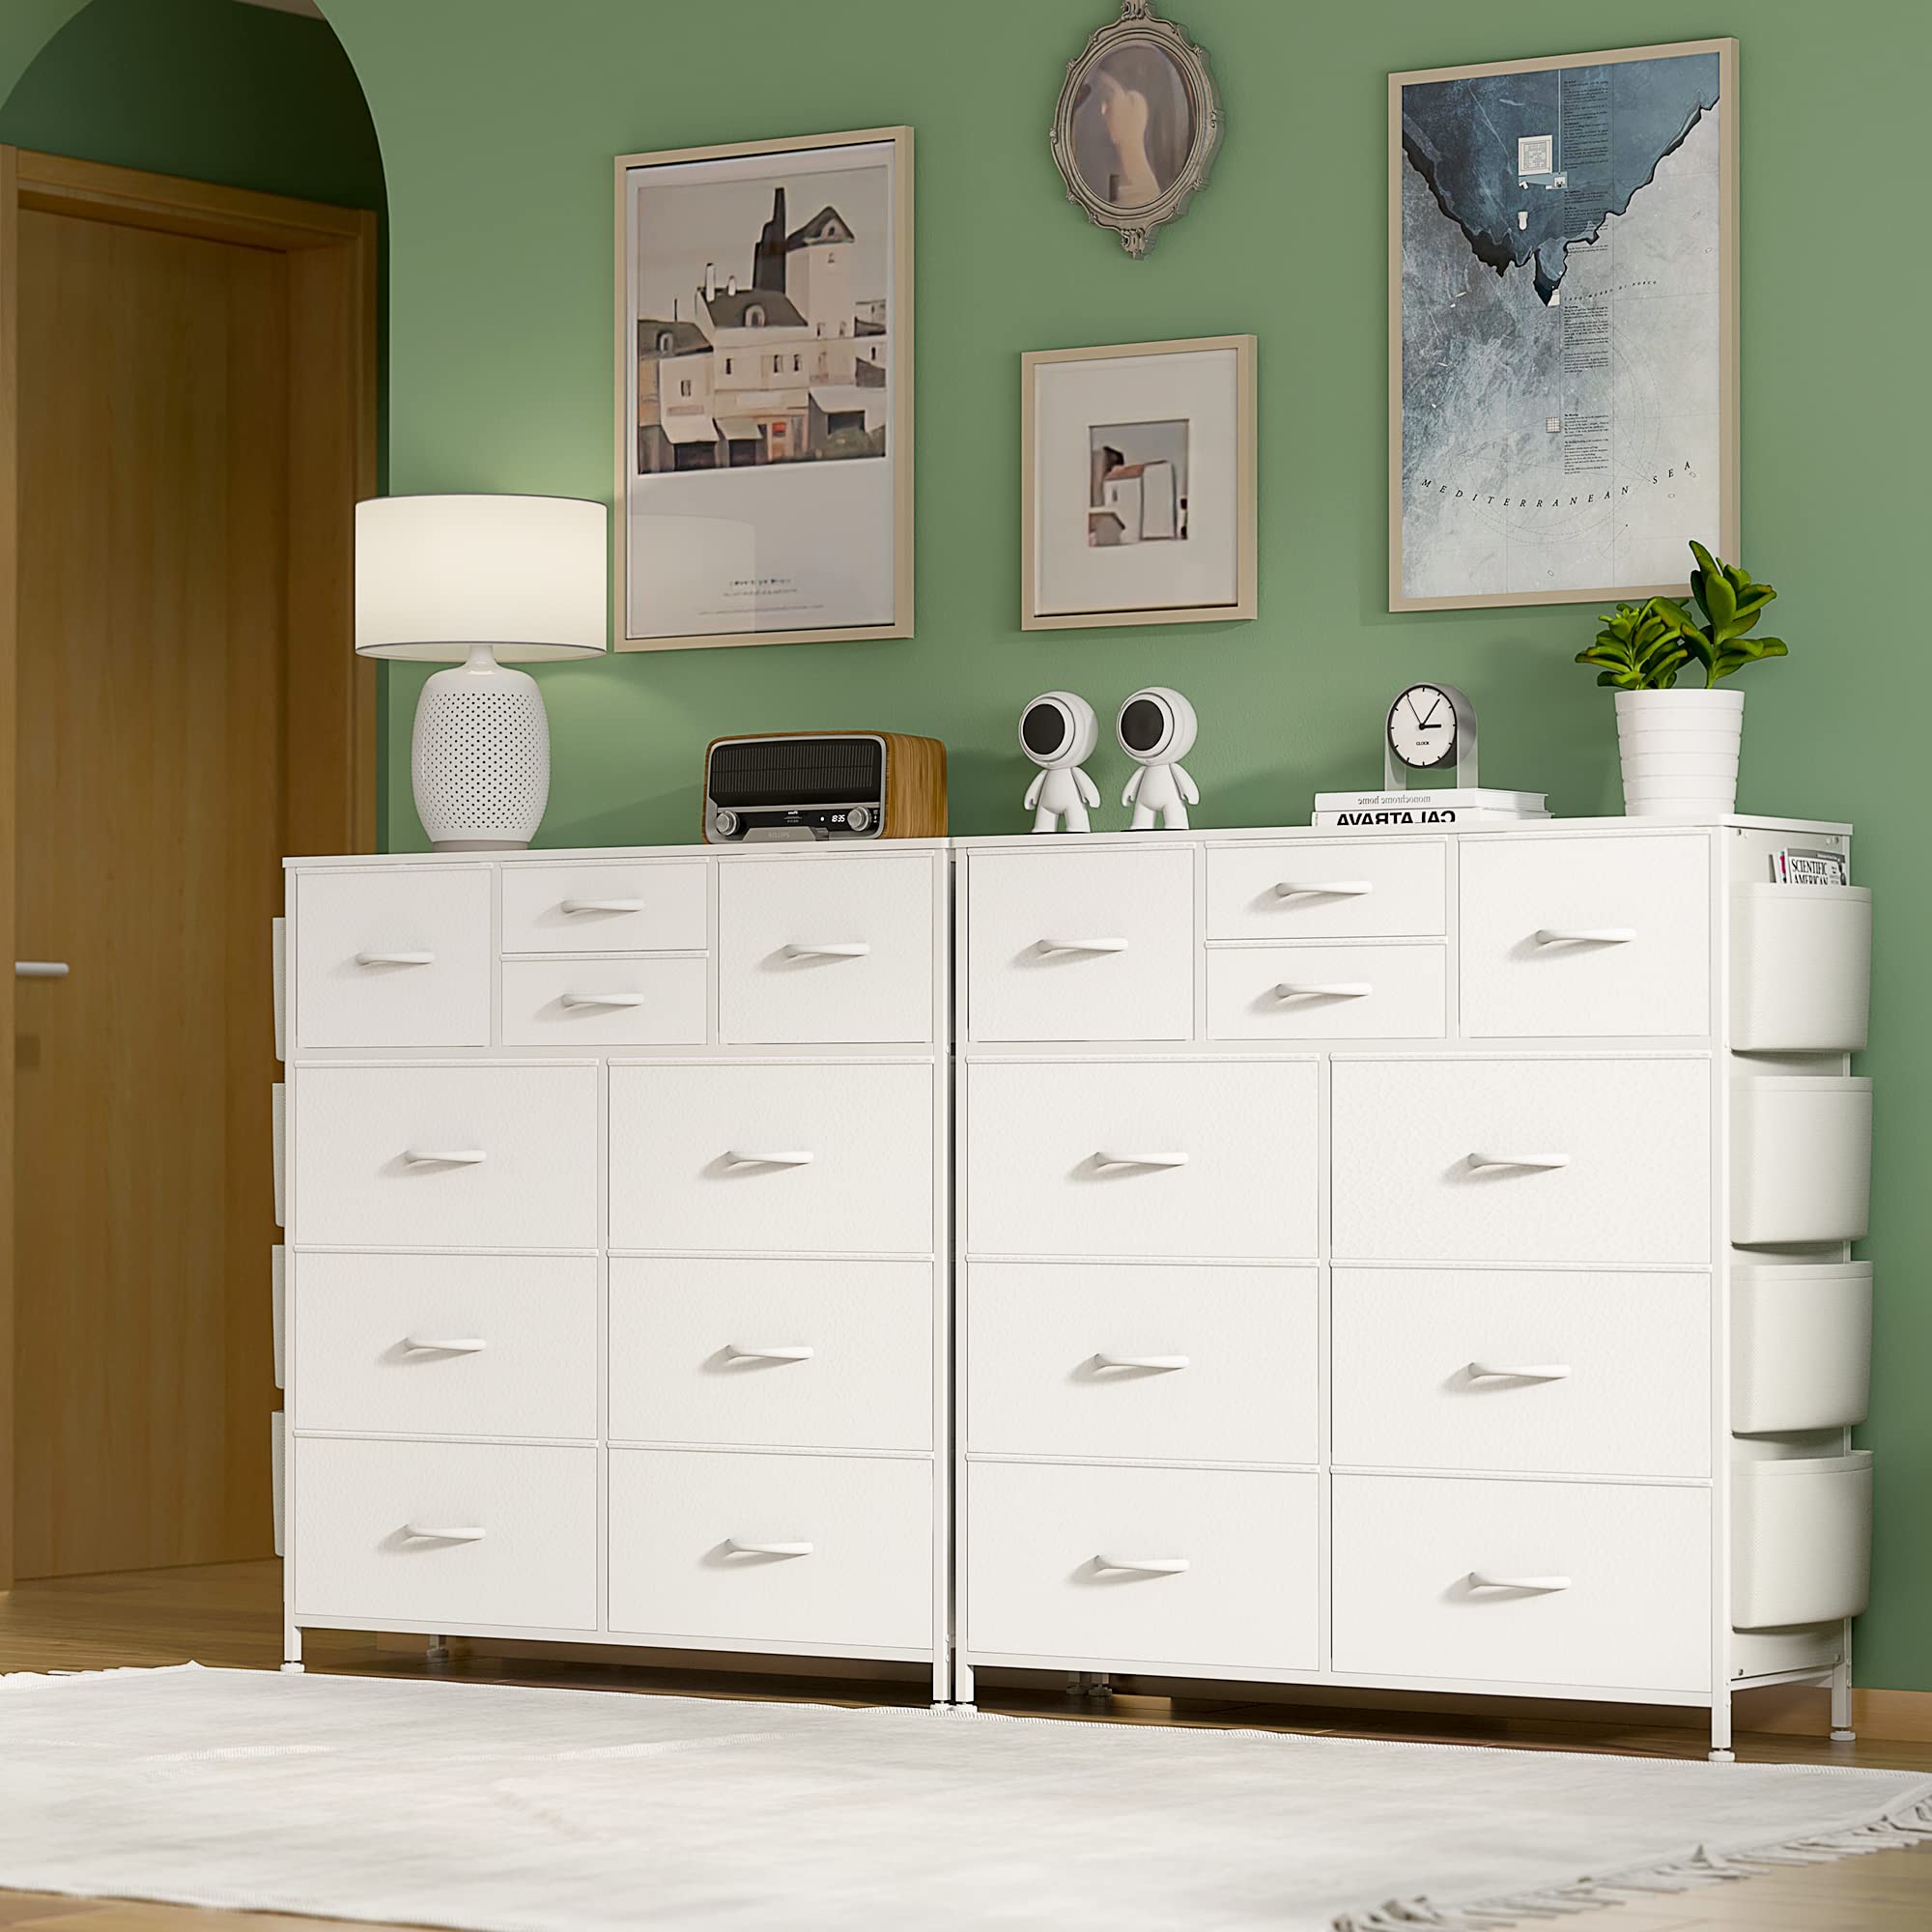 GIKPAL 10 Drawer Dresser, Chest of Drawers for Bedroom with Side Pockets and Hooks, White - image 2 of 10